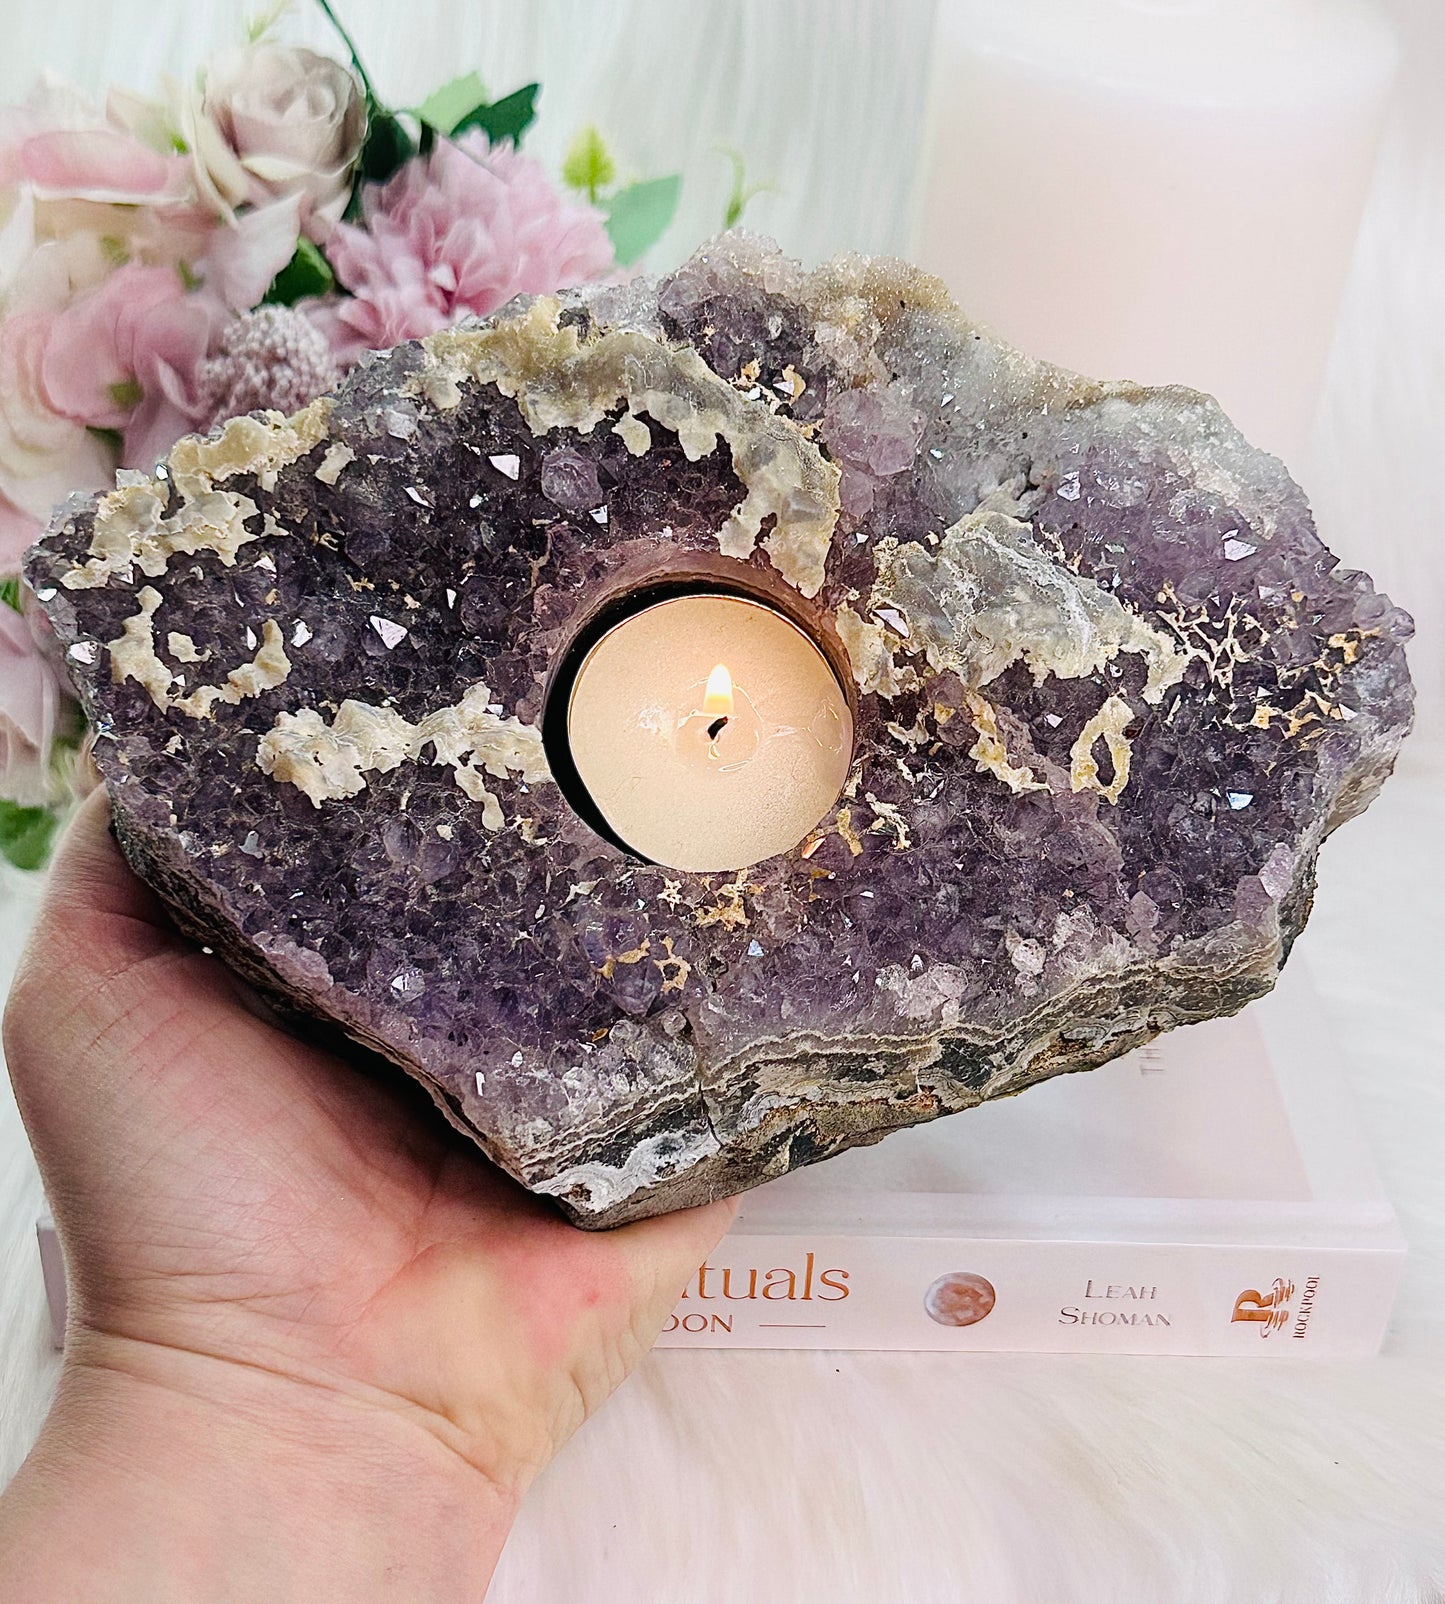 Stunning Large 1.26KG Amethyst Cluster Candle Holder With Gorgeous Calcite Inclusions From Brazil